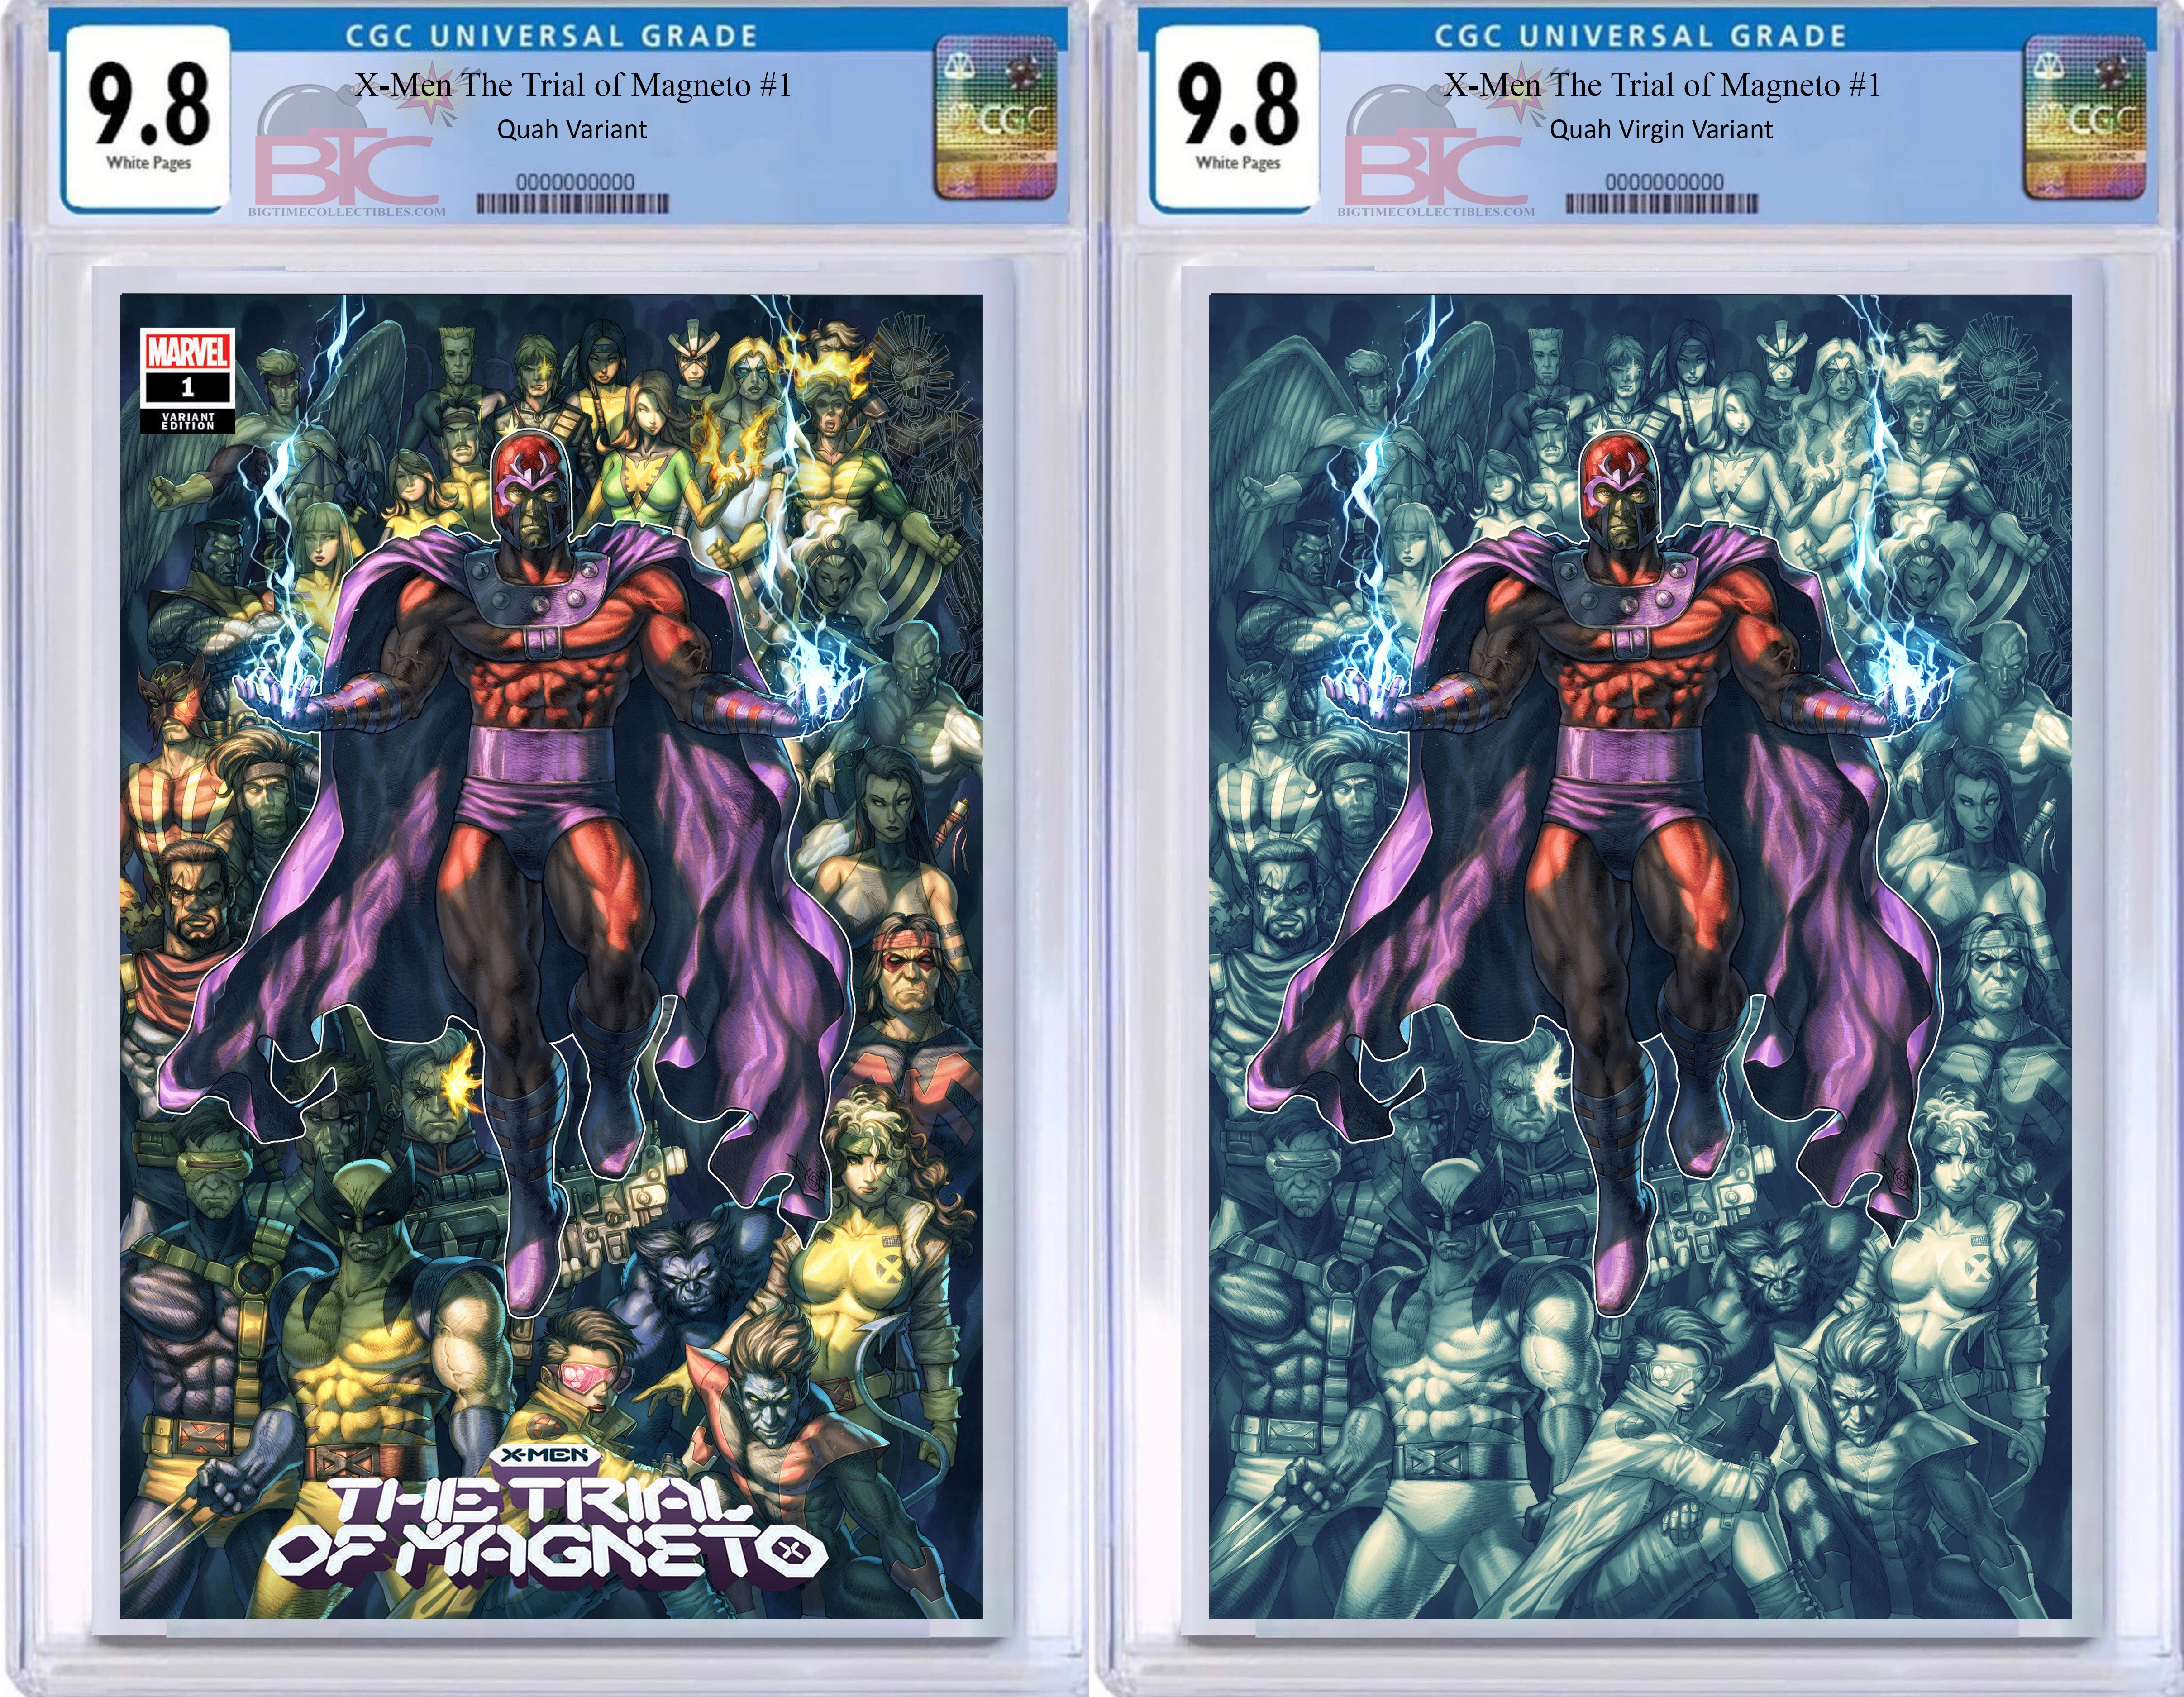 08/18/2021 X-MEN TRIAL OF MAGNETO #1 ALAN QUAH EXCLUSIVE VARIANT COVER RAW & GRADED OPTIONS